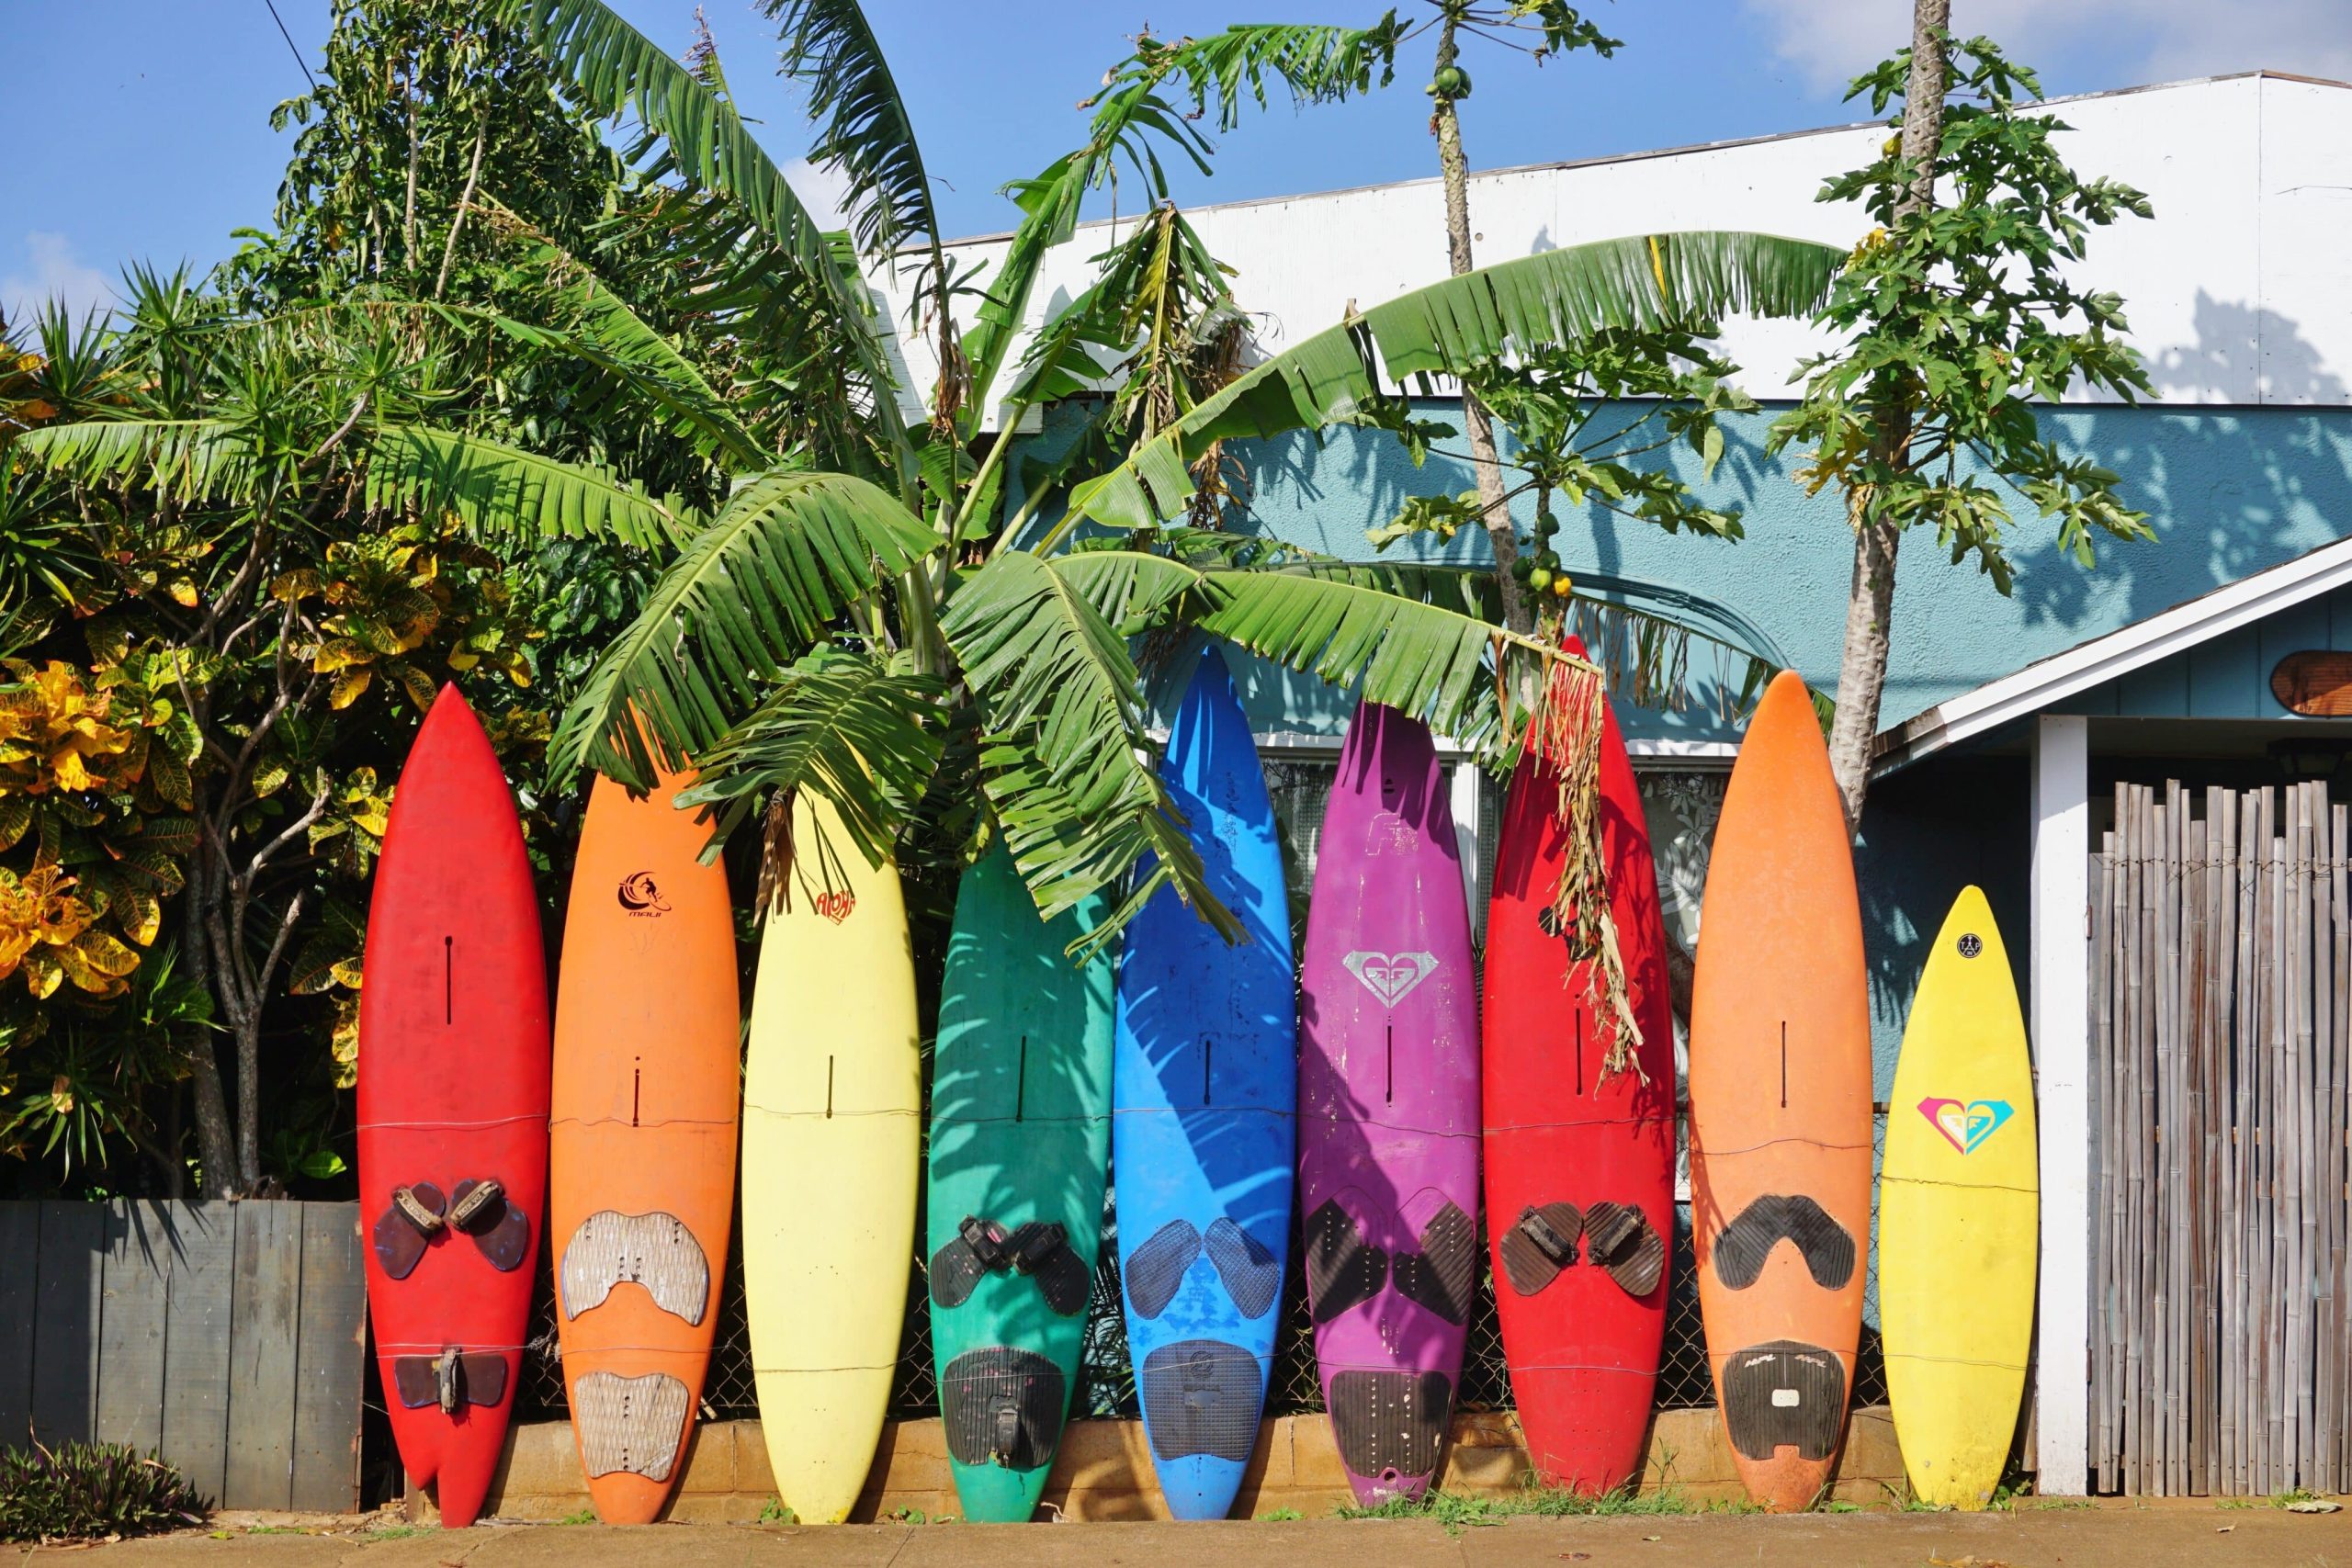 Surf’s Up! Uruguayan Authorities Find Cocaine Smuggled Inside Surfboards